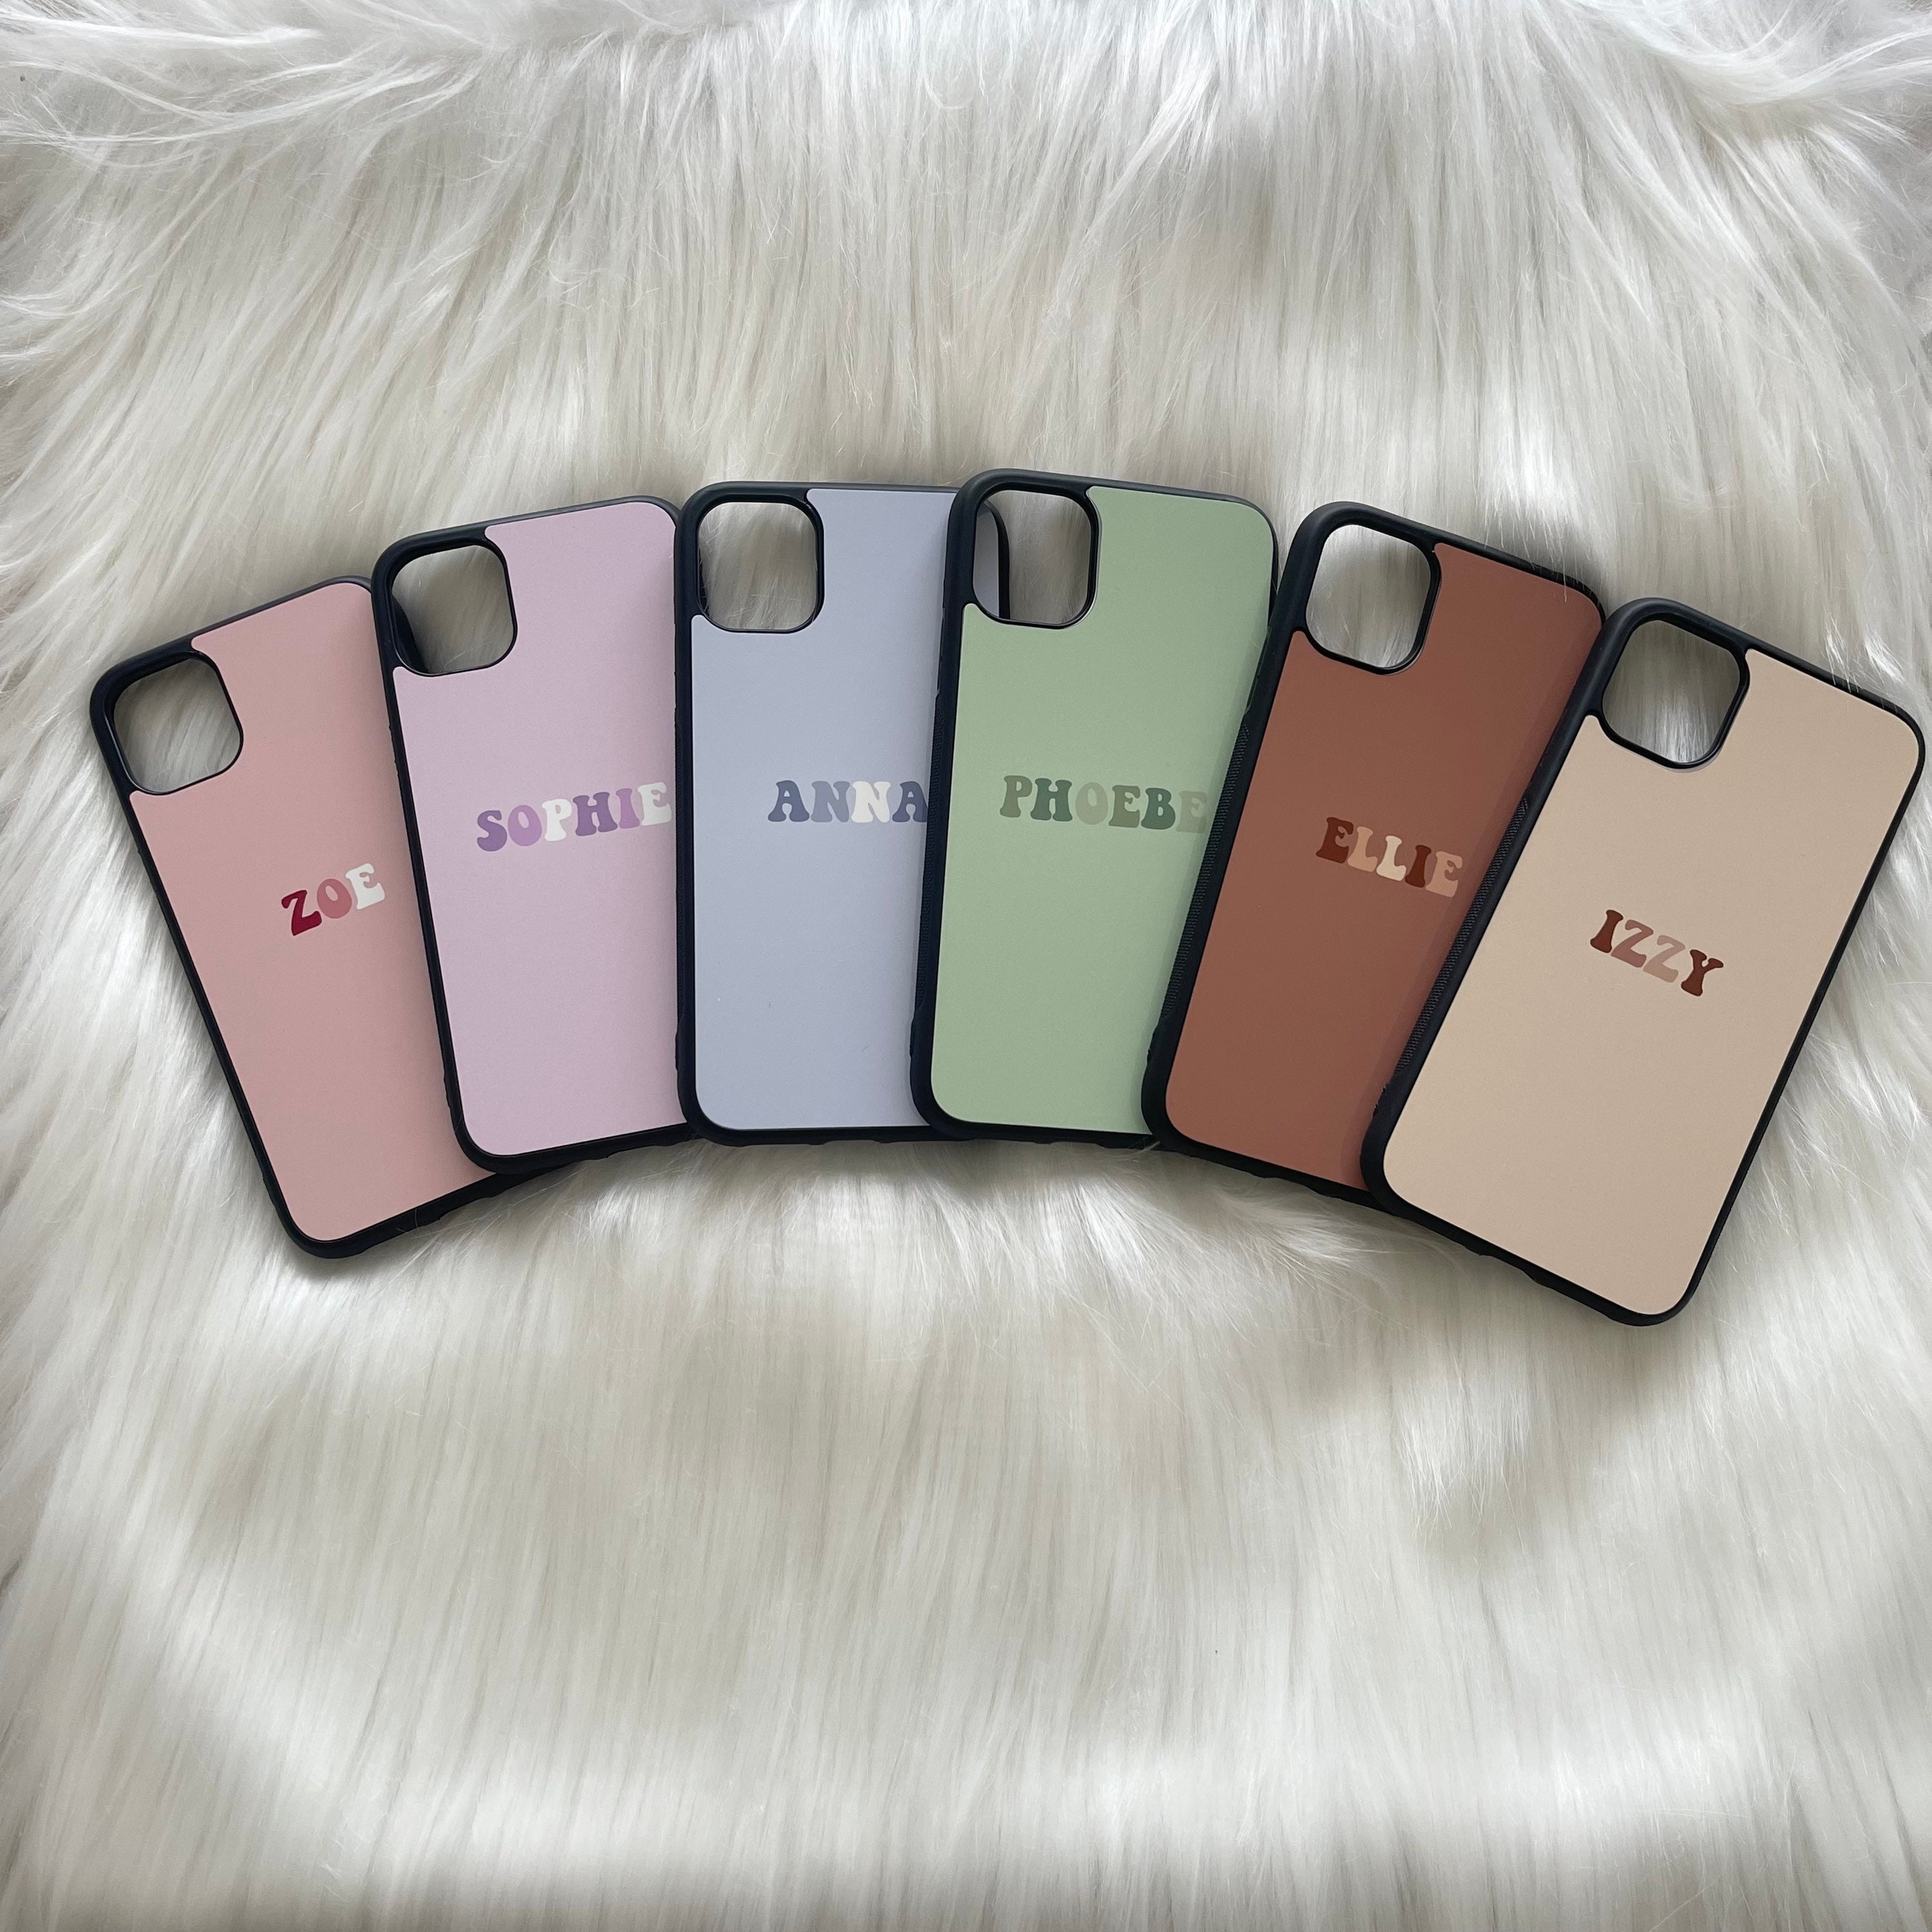 Makeup iPhone Cases for Sale